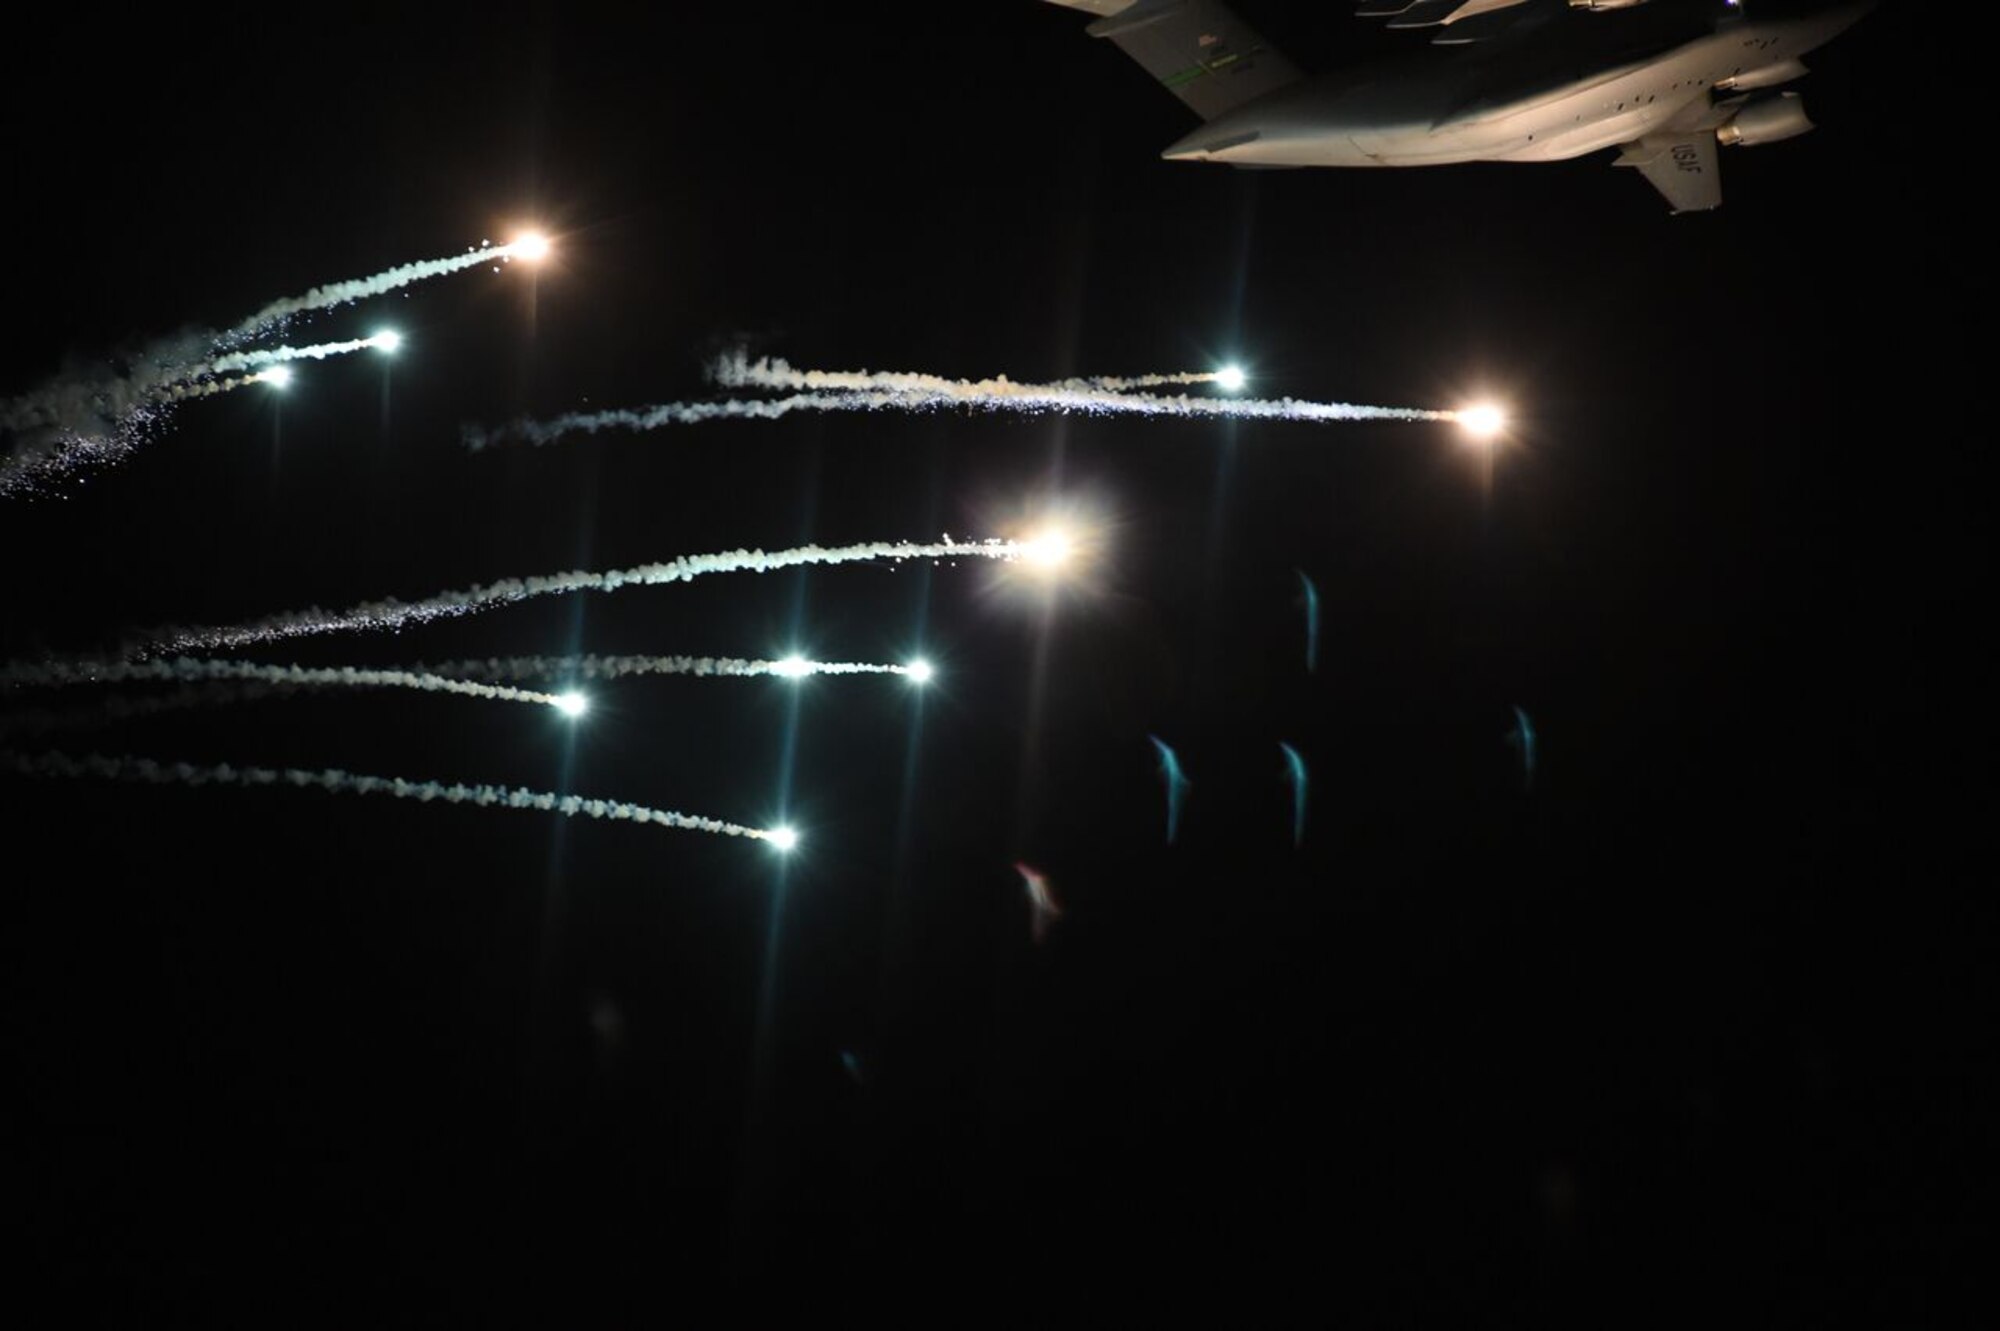 A C-17 Globemaster III from Joint Base Lewis-McChord, Wash., ejects flares over the Eglin Range March 2, 2016, at Eglin Air Force Base, Fla. The McChord Field C-17 was participating in Air Mobility Command flare effectiveness testing at Eglin AFB to ensure the infrared countermeasures are working as intended. (U.S. Air Force photo/Staff Sgt. Naomi Shipley) 